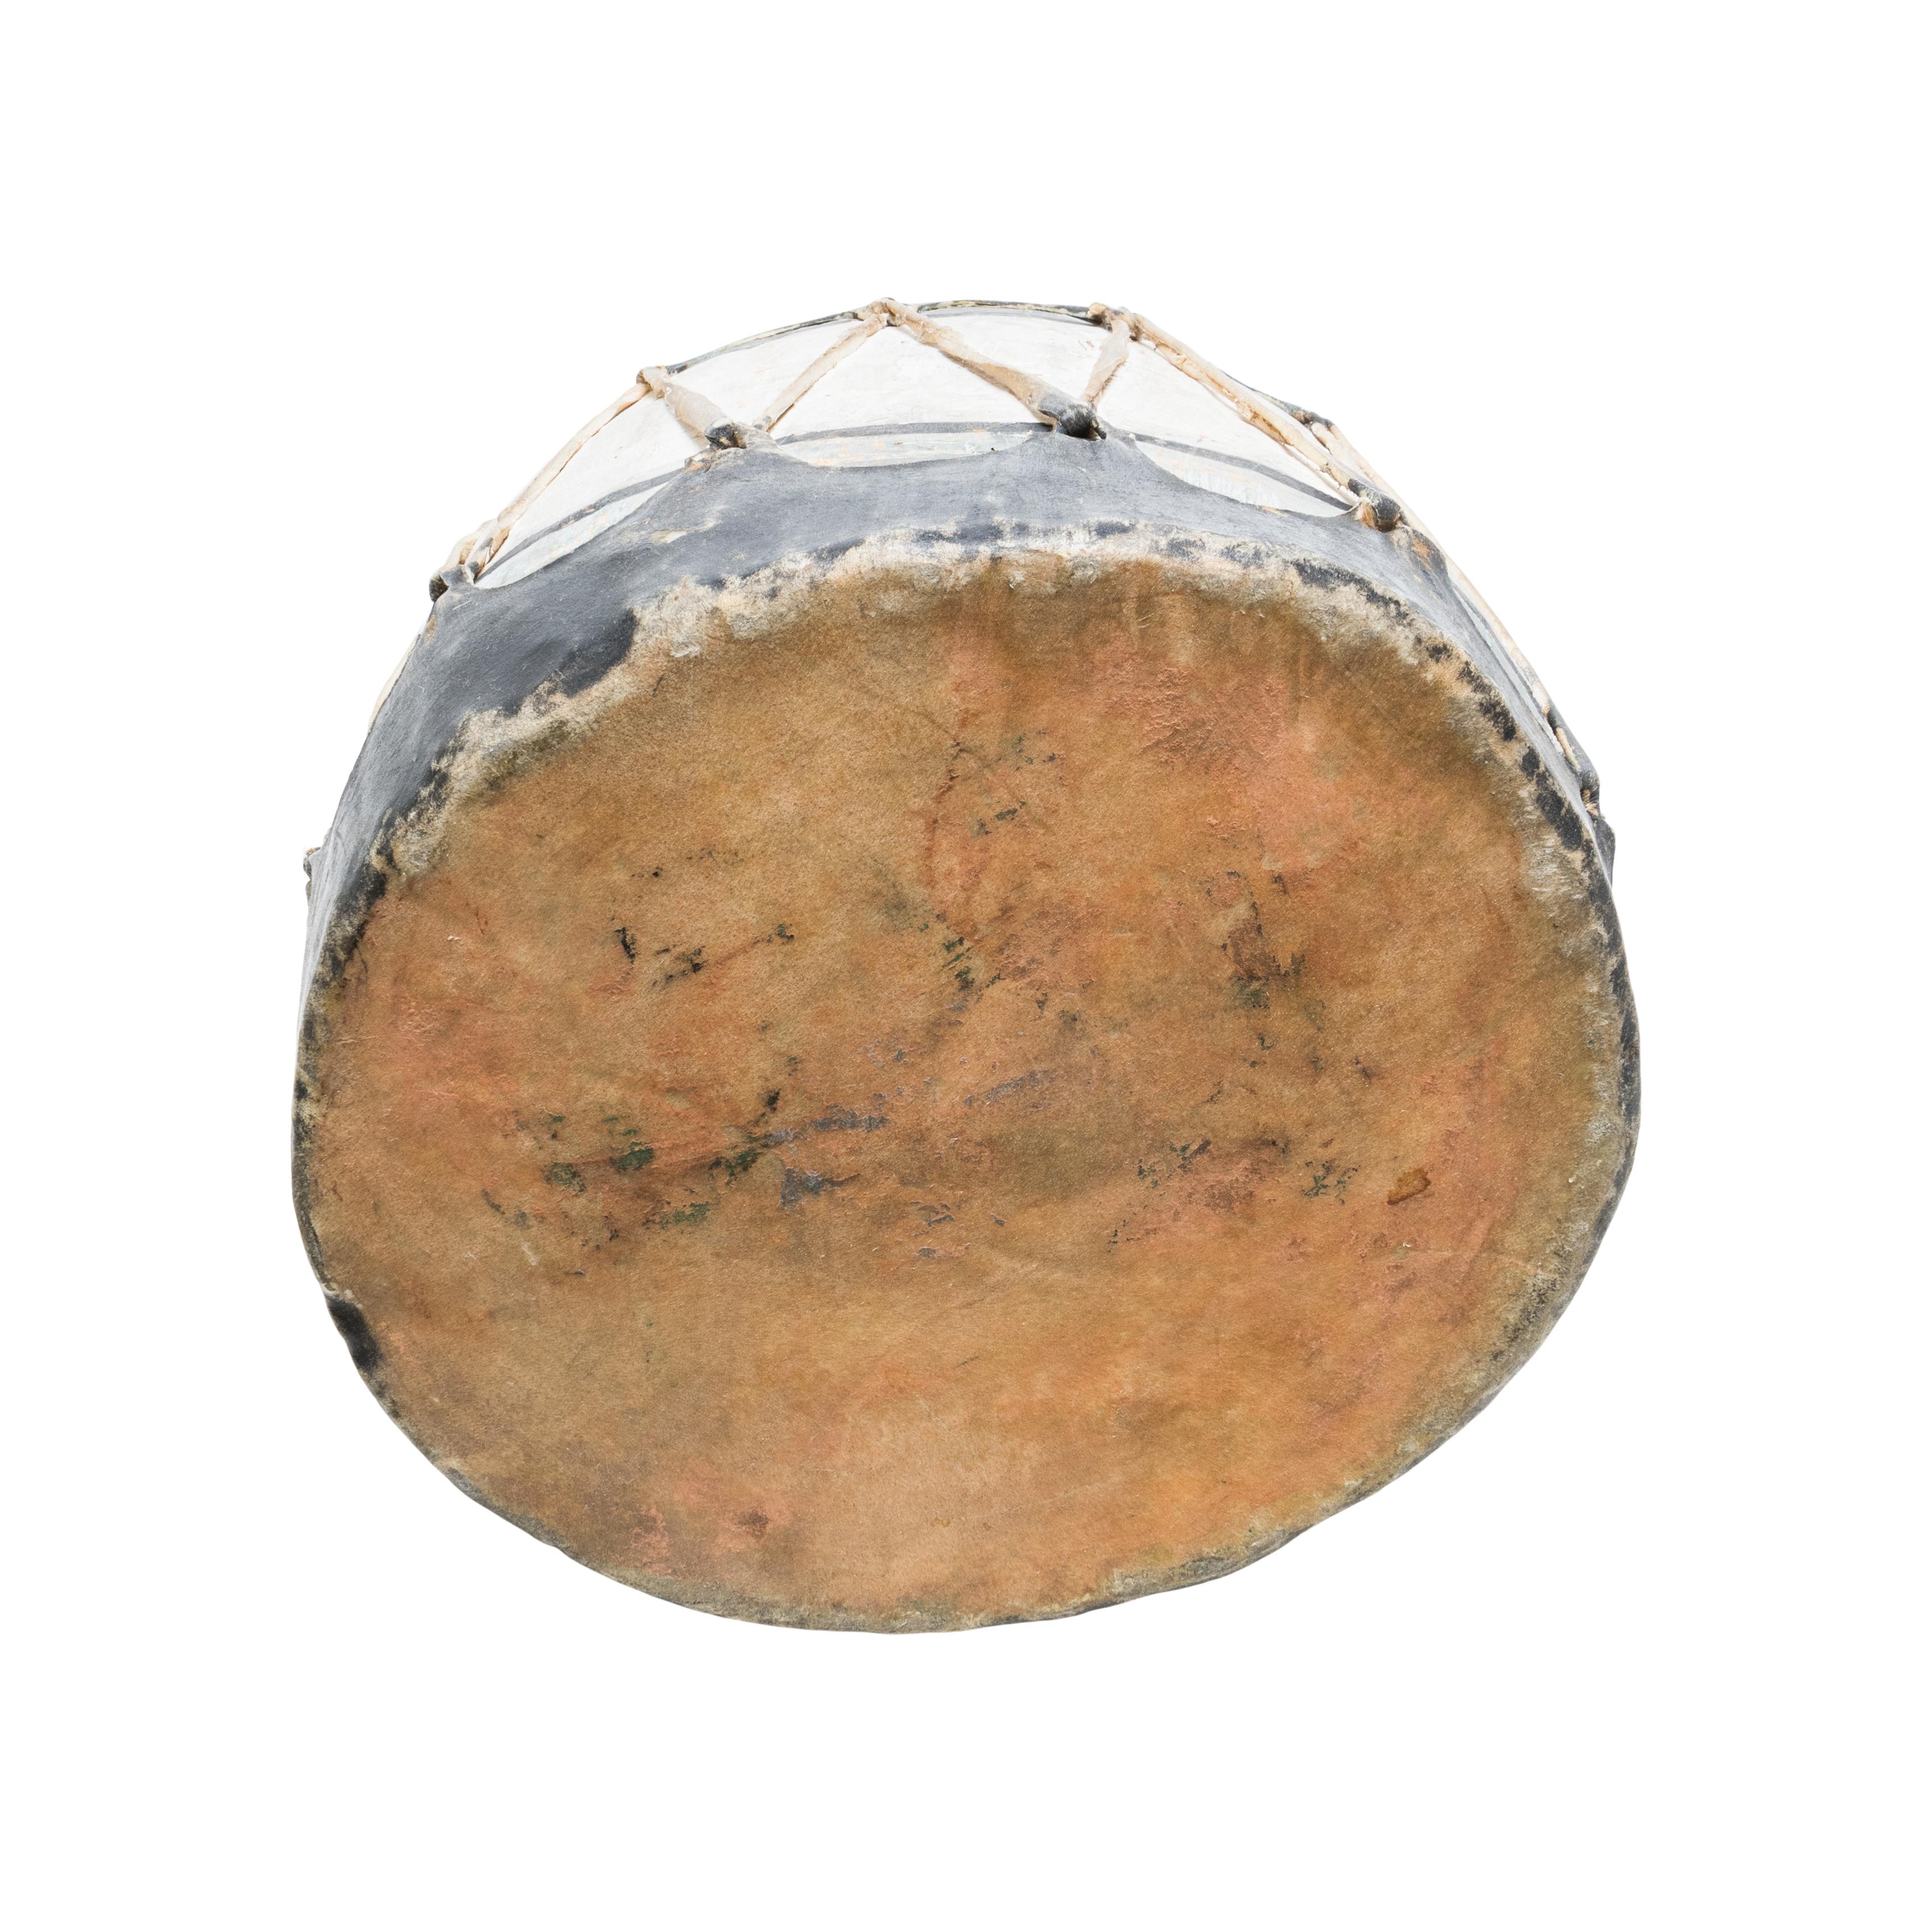 Native American Cochiti drum with sides painted in black, white and turquoise. Made of a cottonwood log and hide. 

Period: Early 20th century

Origin: Southwest, Cochiti

Size: 11